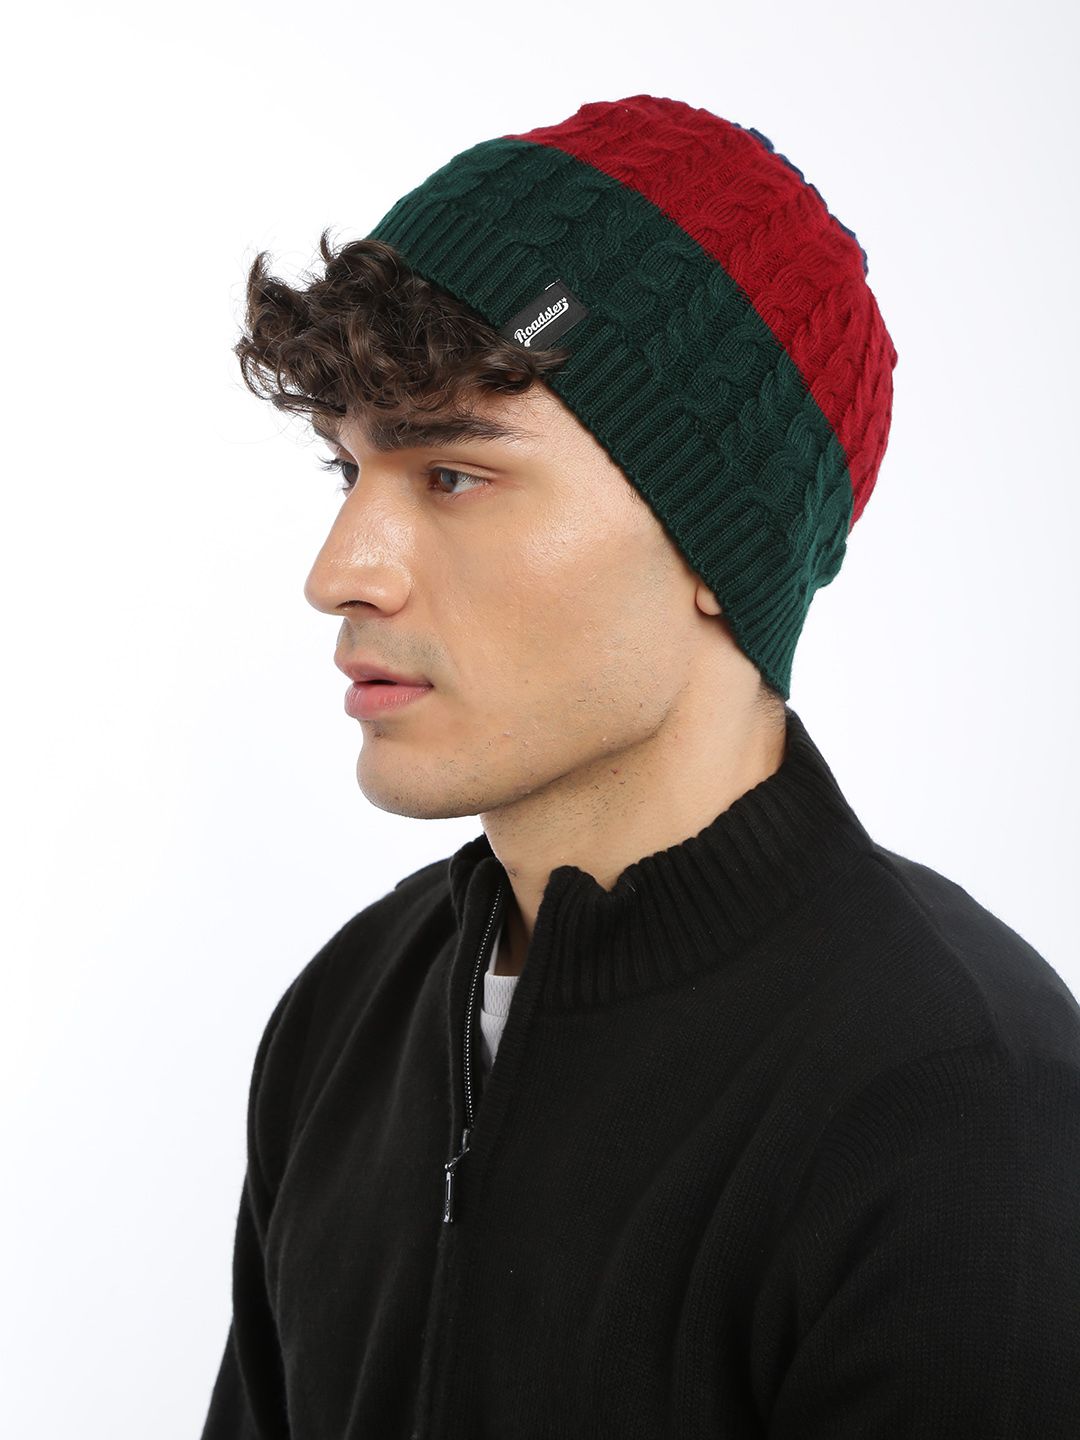 The Roadster Lifestyle Co Unisex Navy Blue & Maroon Colourblocked Beanie Price in India